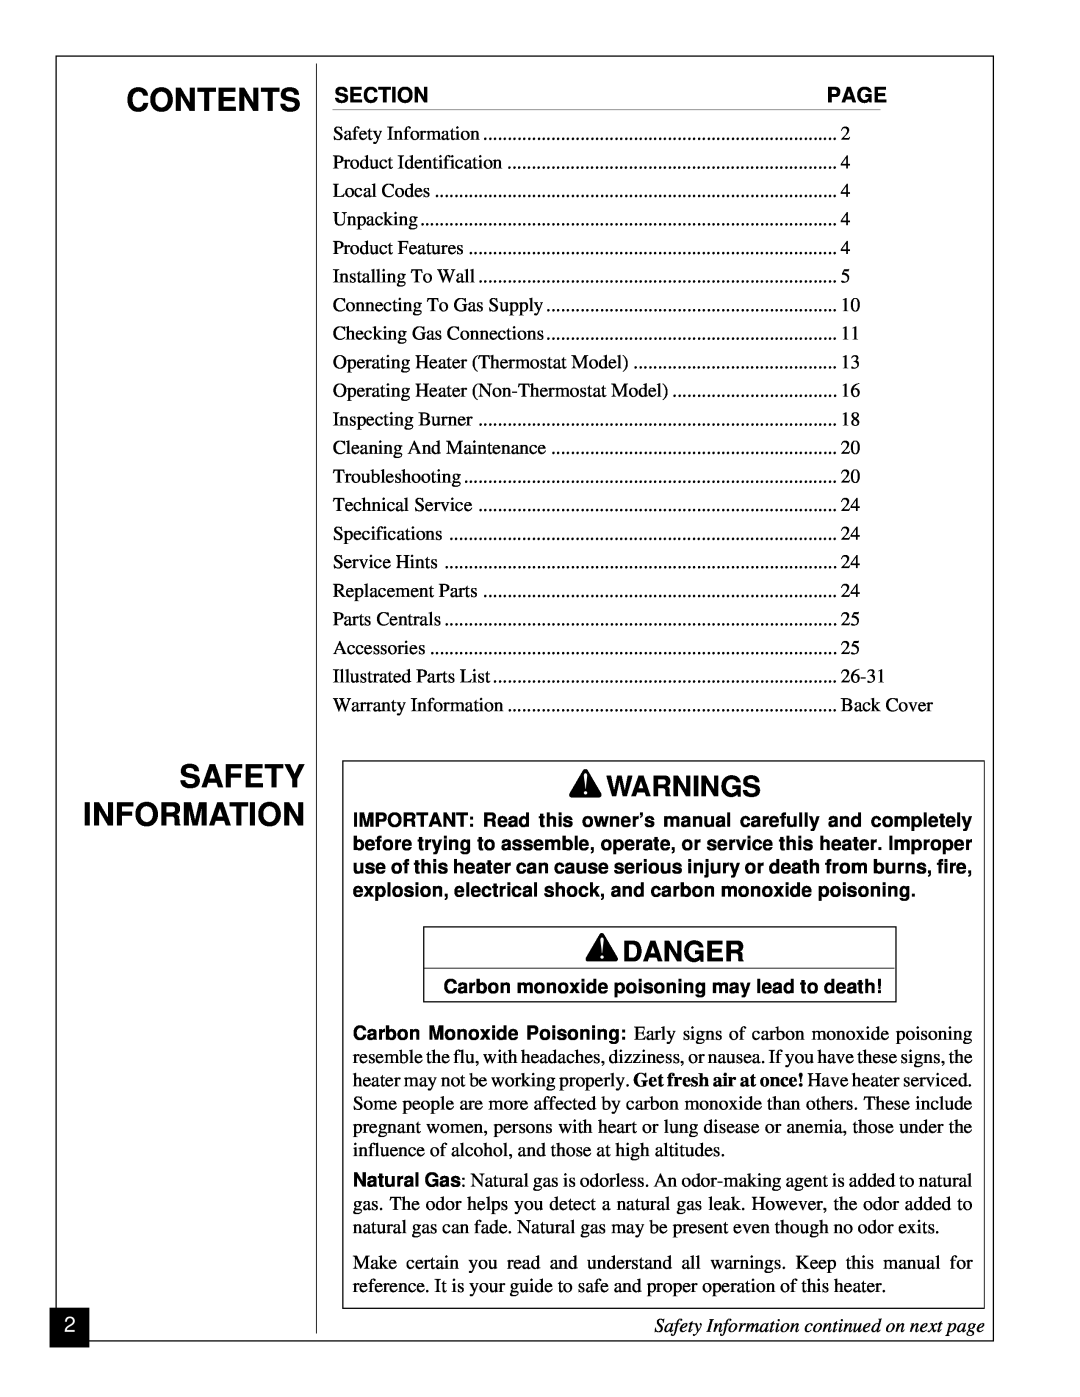 Desa RN30BT installation manual Contents Safety Information, Warnings, Danger, Safety Information continued on next page 